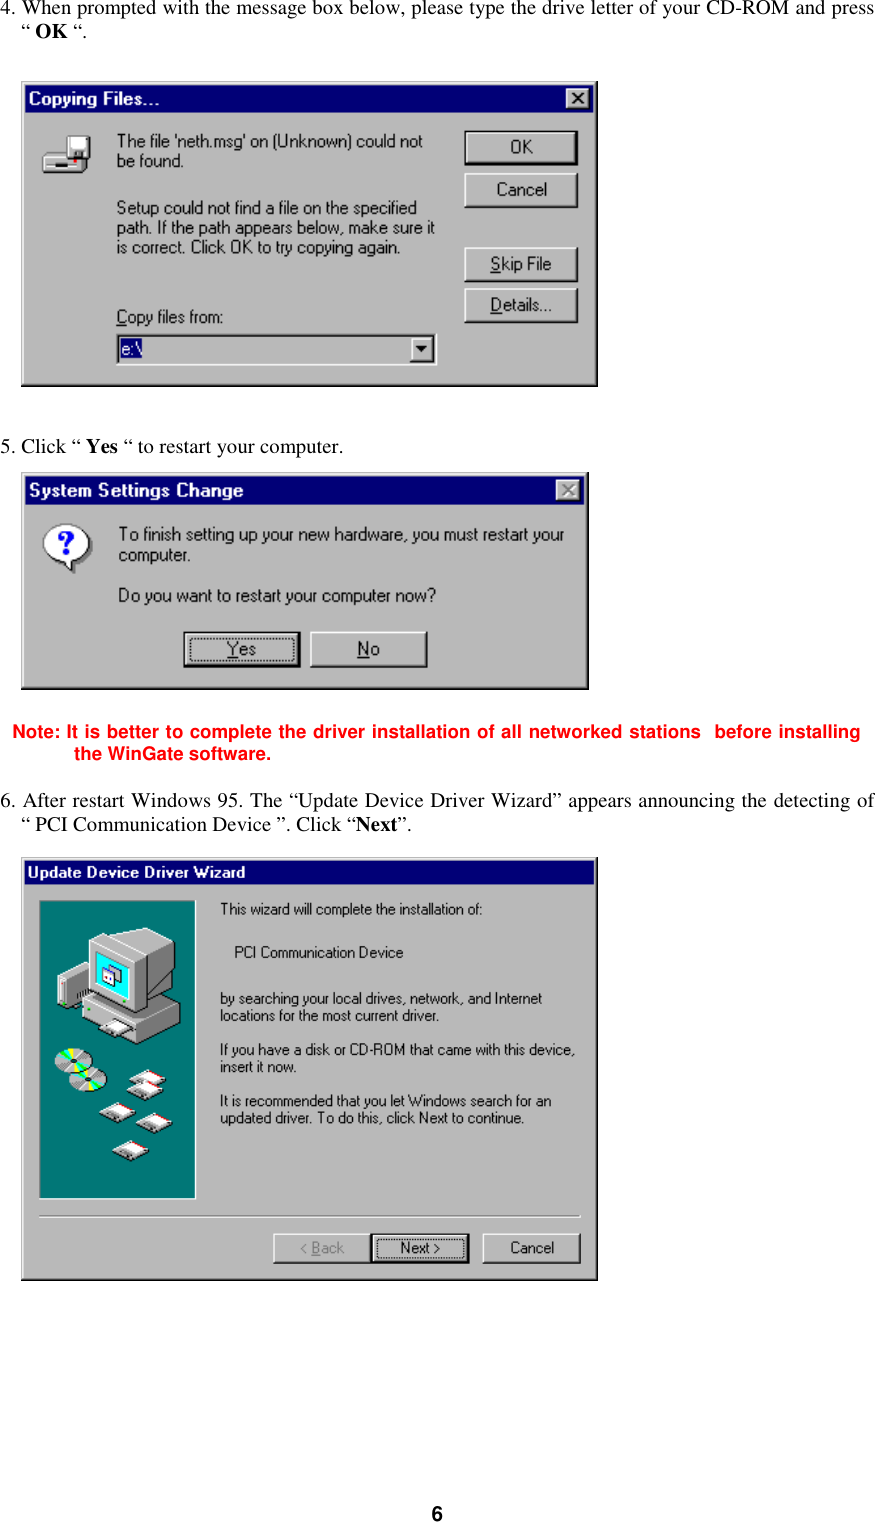 64. When prompted with the message box below, please type the drive letter of your CD-ROM and press“ OK “.5. Click “ Yes “ to restart your computer.Note: It is better to complete the driver installation of all networked stations  before installingthe WinGate software.6. After restart Windows 95. The “Update Device Driver Wizard” appears announcing the detecting of“ PCI Communication Device ”. Click “Next”.